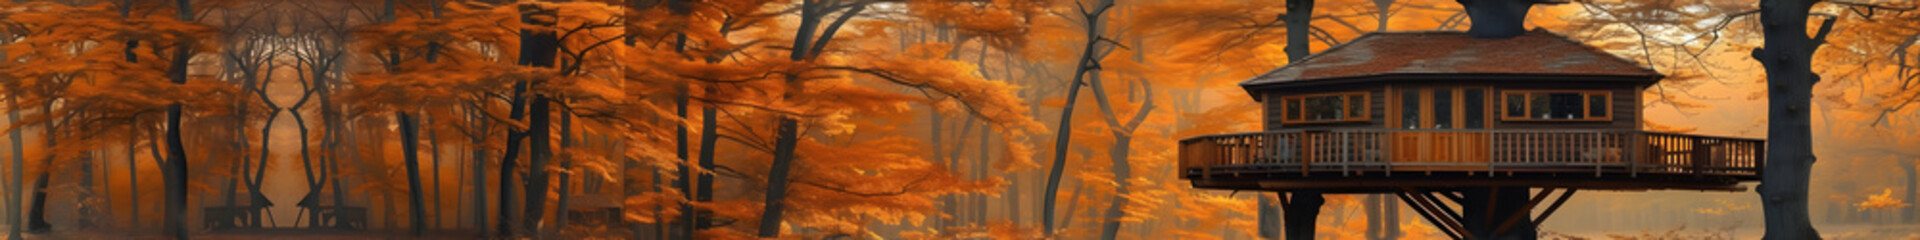 panorama of tree house in forest in autumn, for web banner with image ratio 8:1